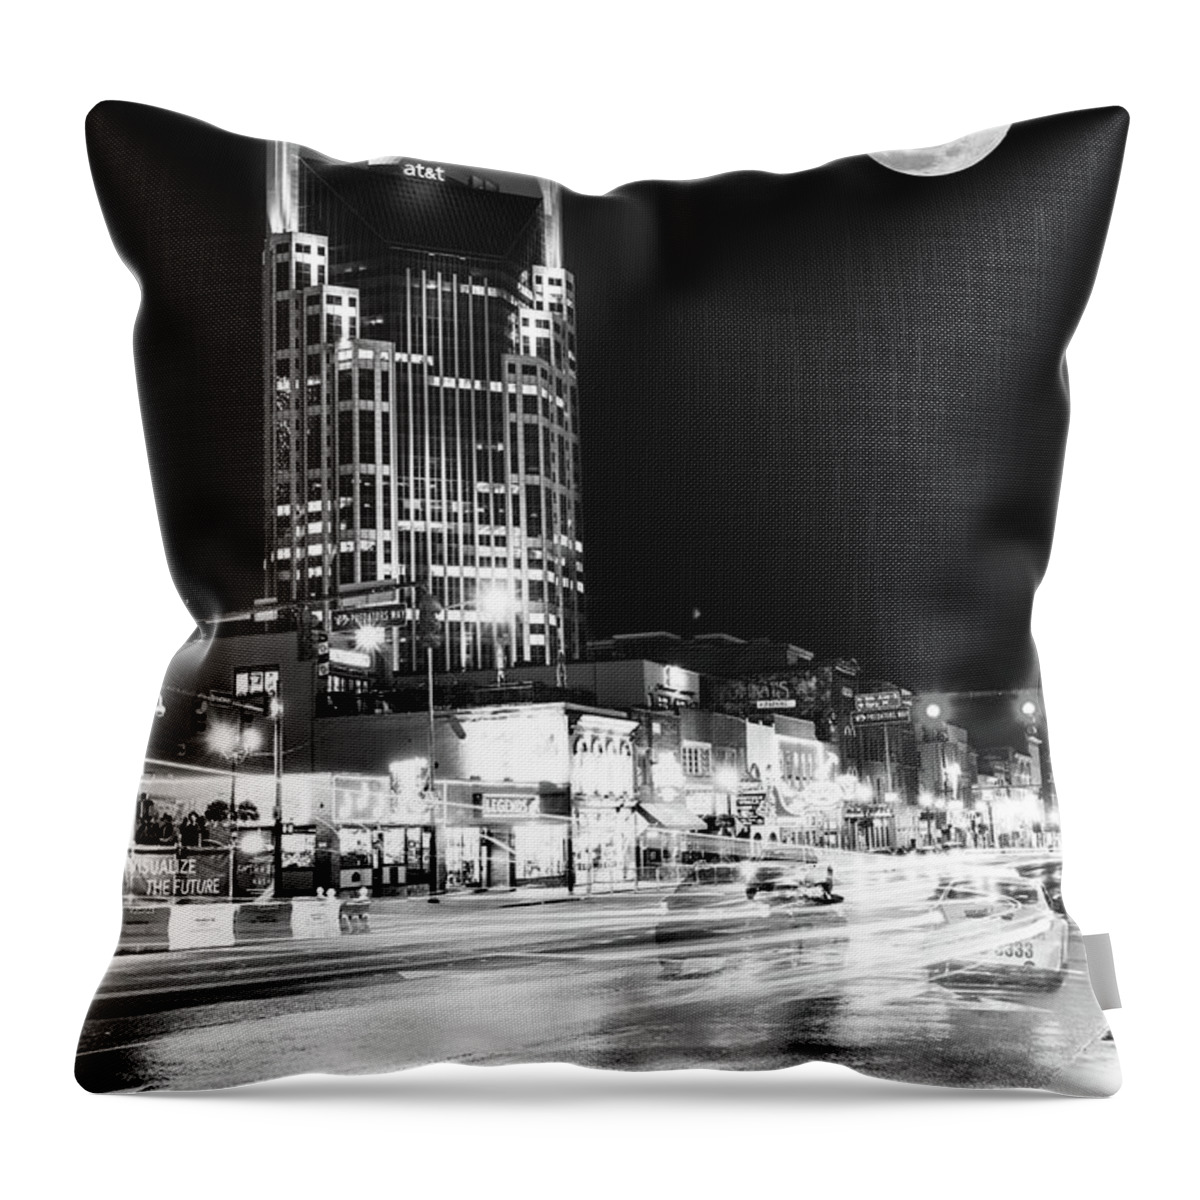 Nashville Skyline Throw Pillow featuring the photograph Nashville Supermoon From Lower Broadway in Monochrome by Gregory Ballos